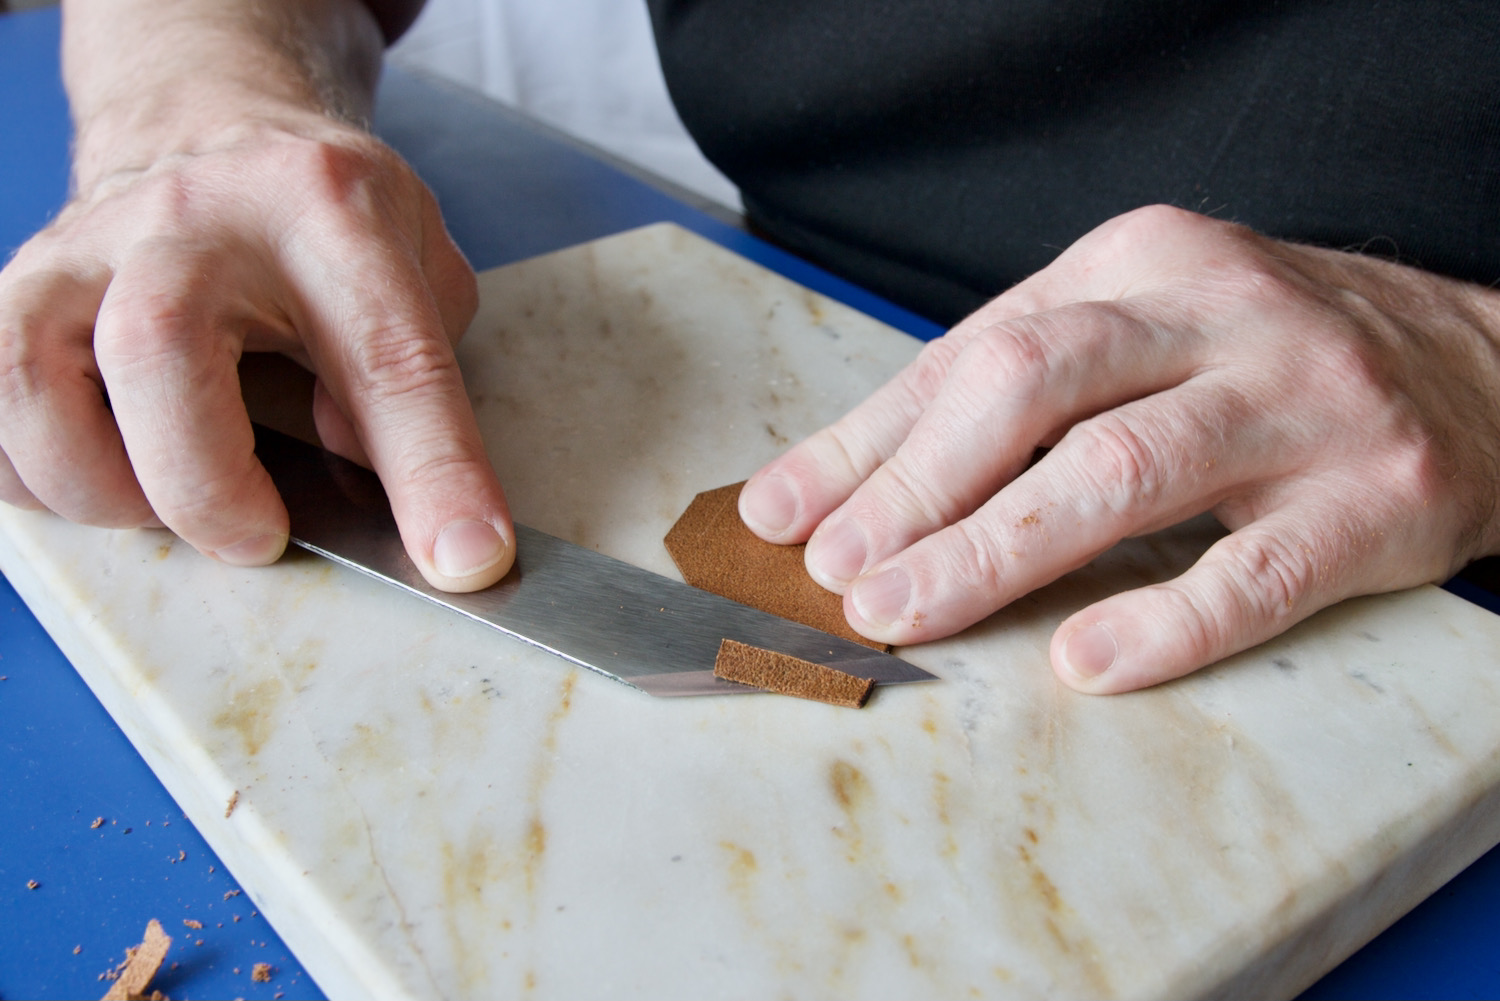 leather craftsman with skiving knife